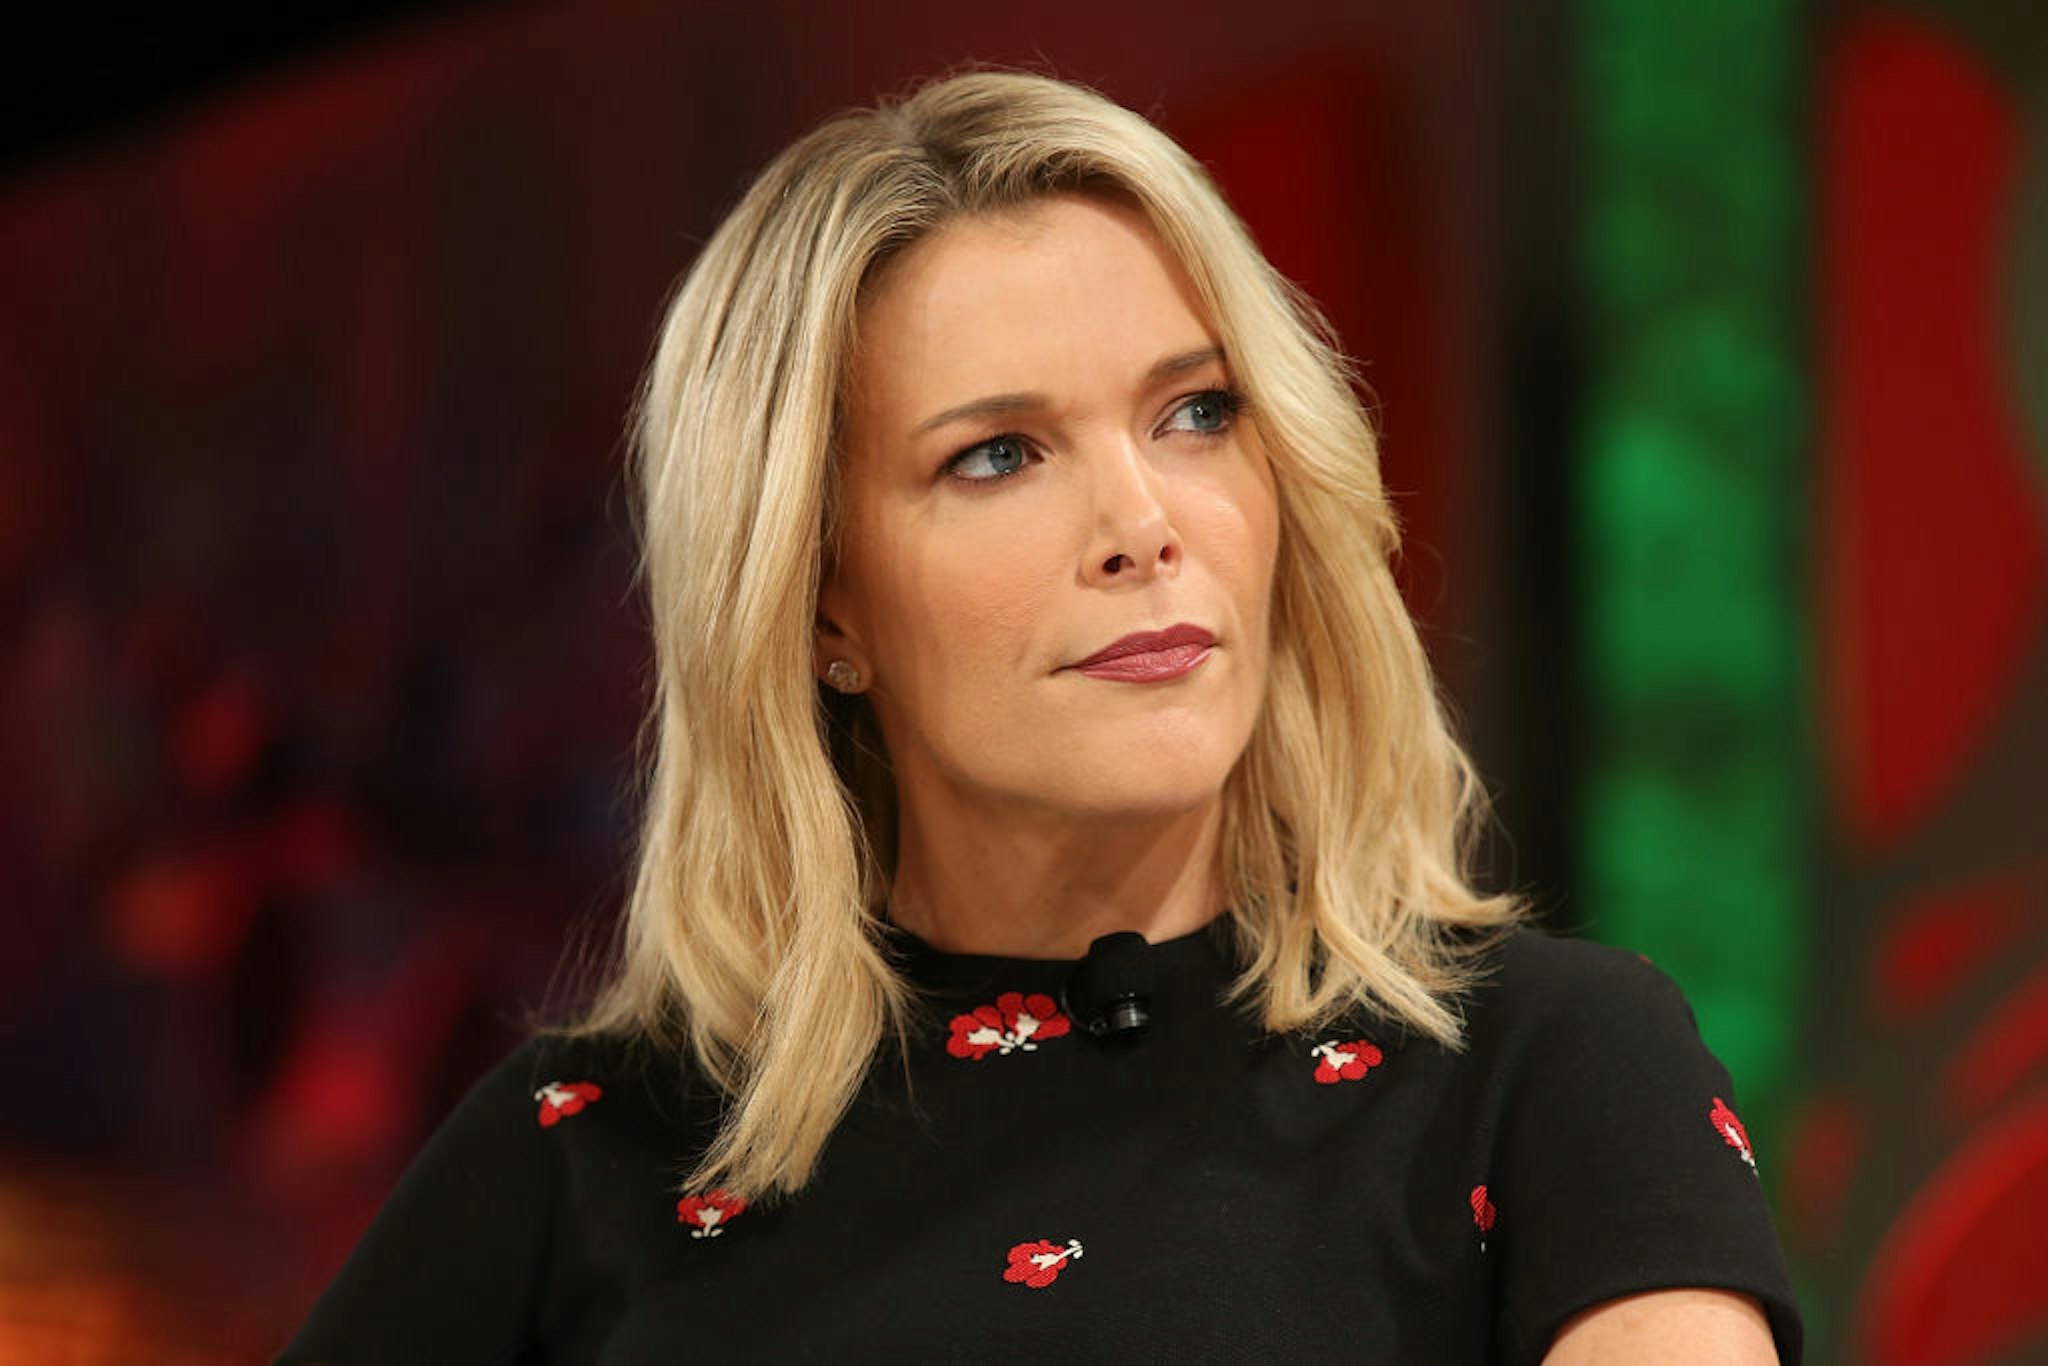 LAGUNA NIGUEL, CA - OCTOBER 02: Megyn Kelly speaks onstage at the Fortune Most Powerful Women Summit 2018 at Ritz Carlton Hotel on October 2, 2018 in Laguna Niguel, California. (Photo by Phillip Faraone/Getty Images for Fortune)